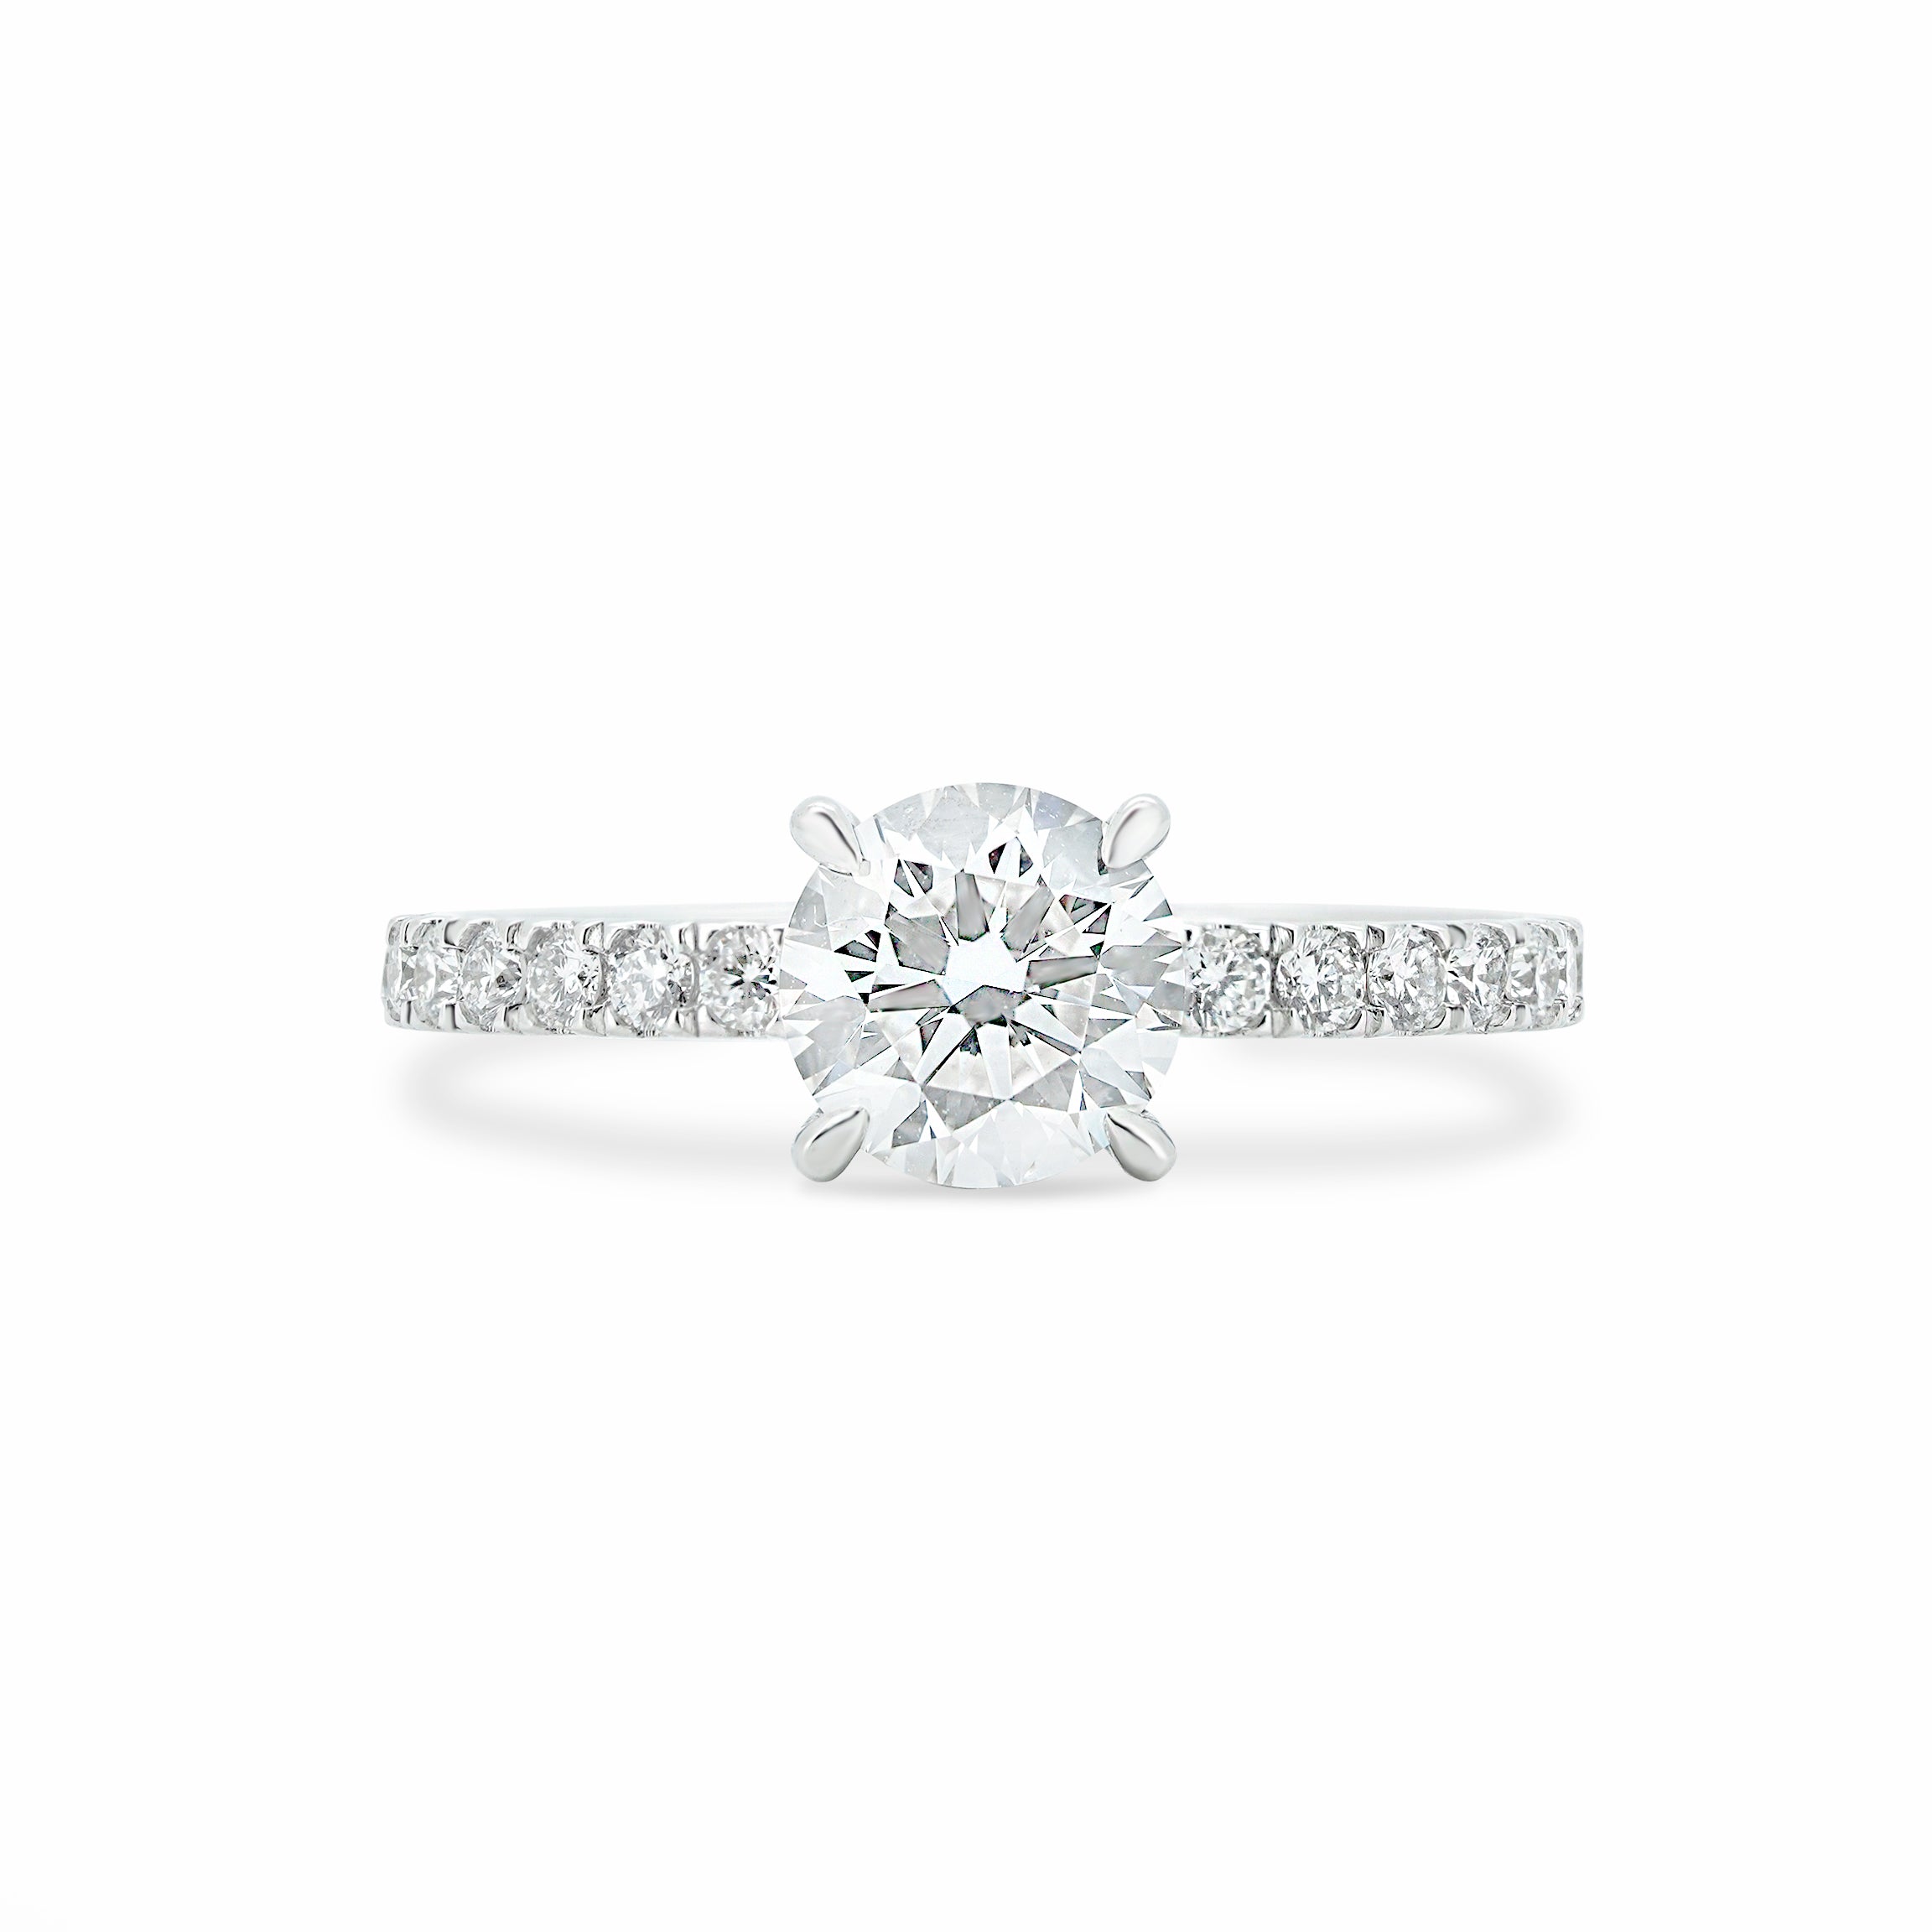 Round Diamond with Hidden Halo and Pave | Sol et Terre